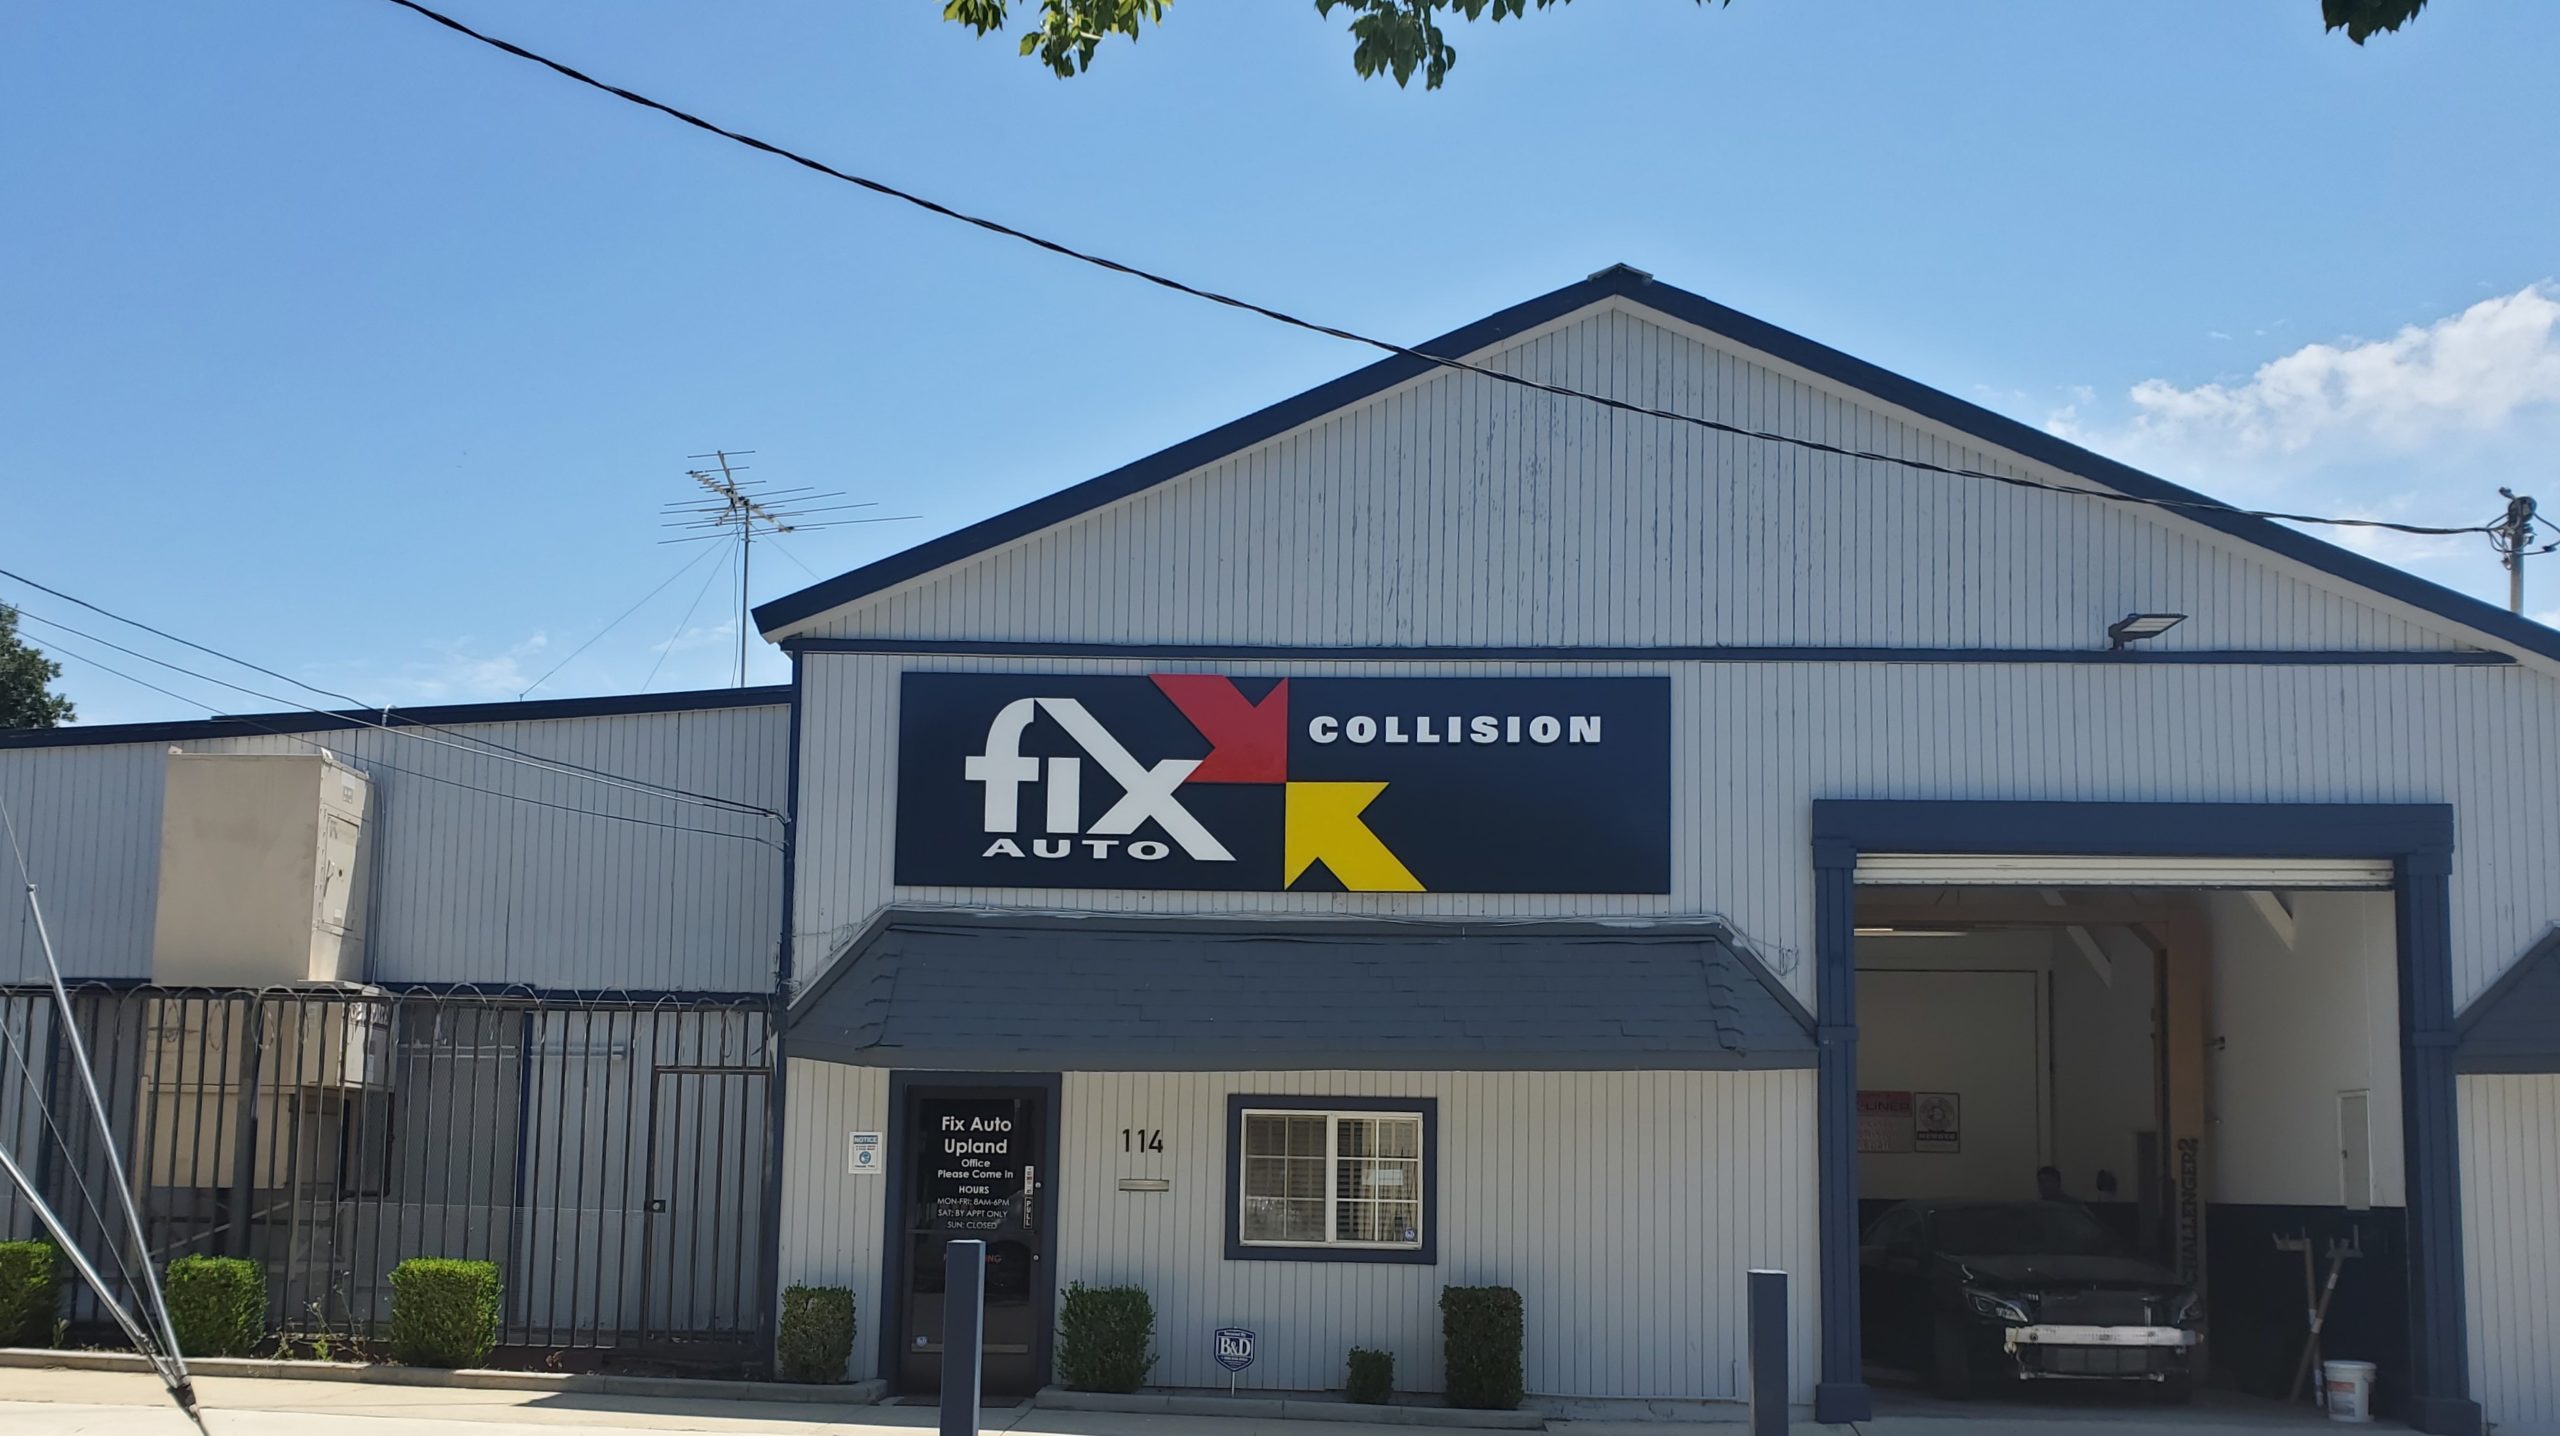 Fix Auto Upland's Building Exterior with signage